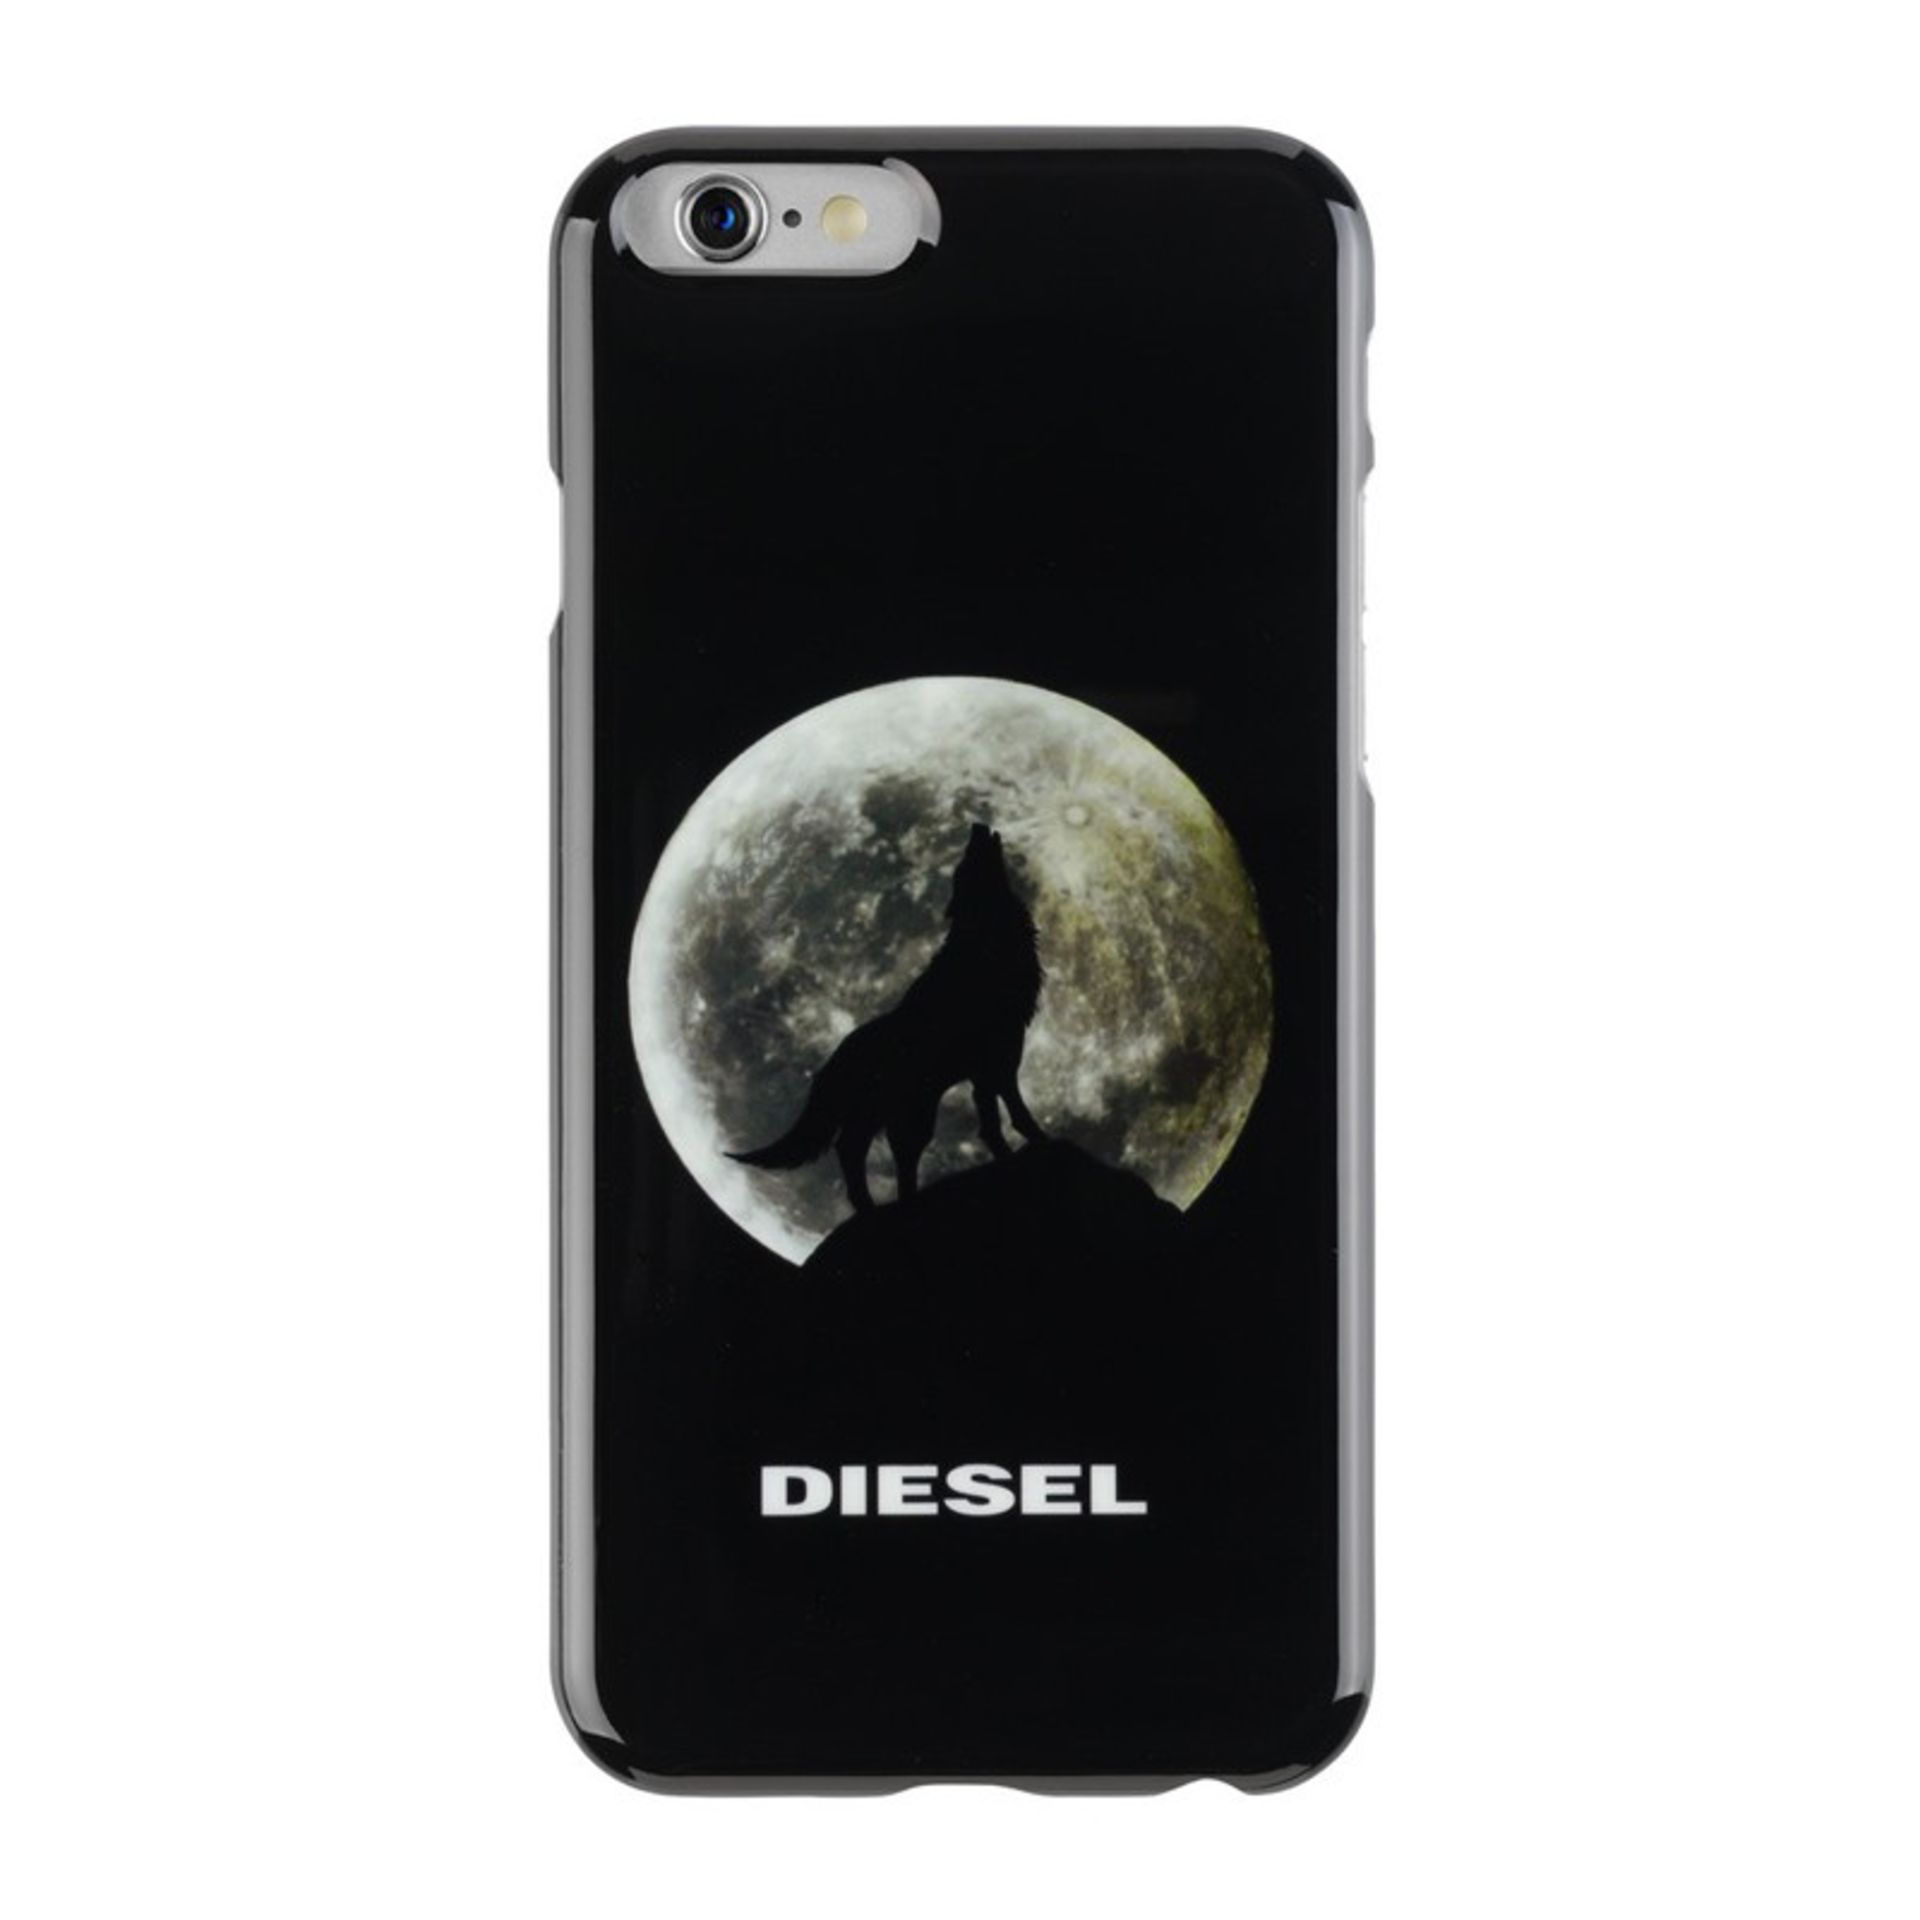 V *TRADE QTY* Brand New Diesel Pluton 6 Hard Snap Case For iPhone 6 ISP Price 19.90 Euros X 5 YOUR